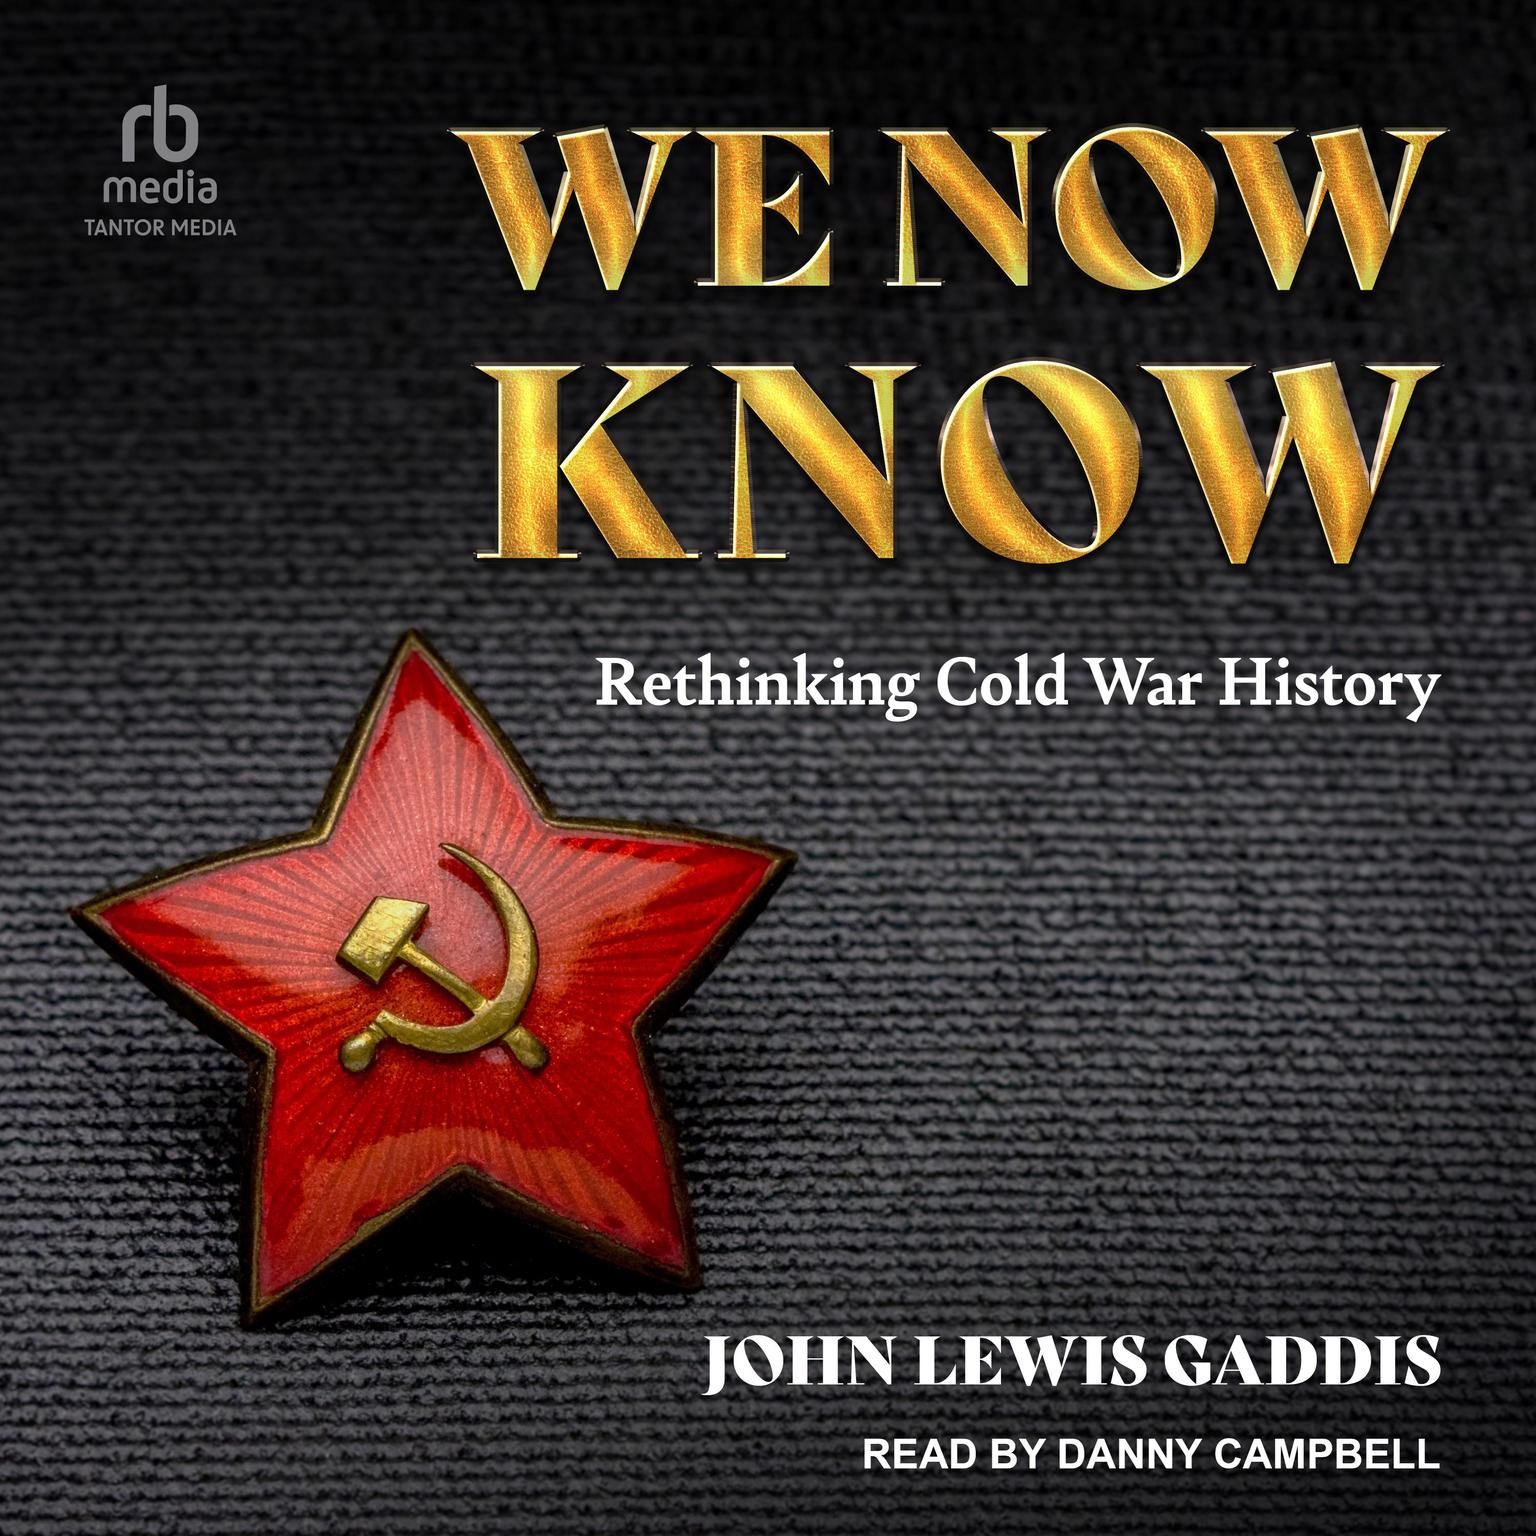 We Now Know: Rethinking Cold War History Audiobook, by John Lewis Gaddis